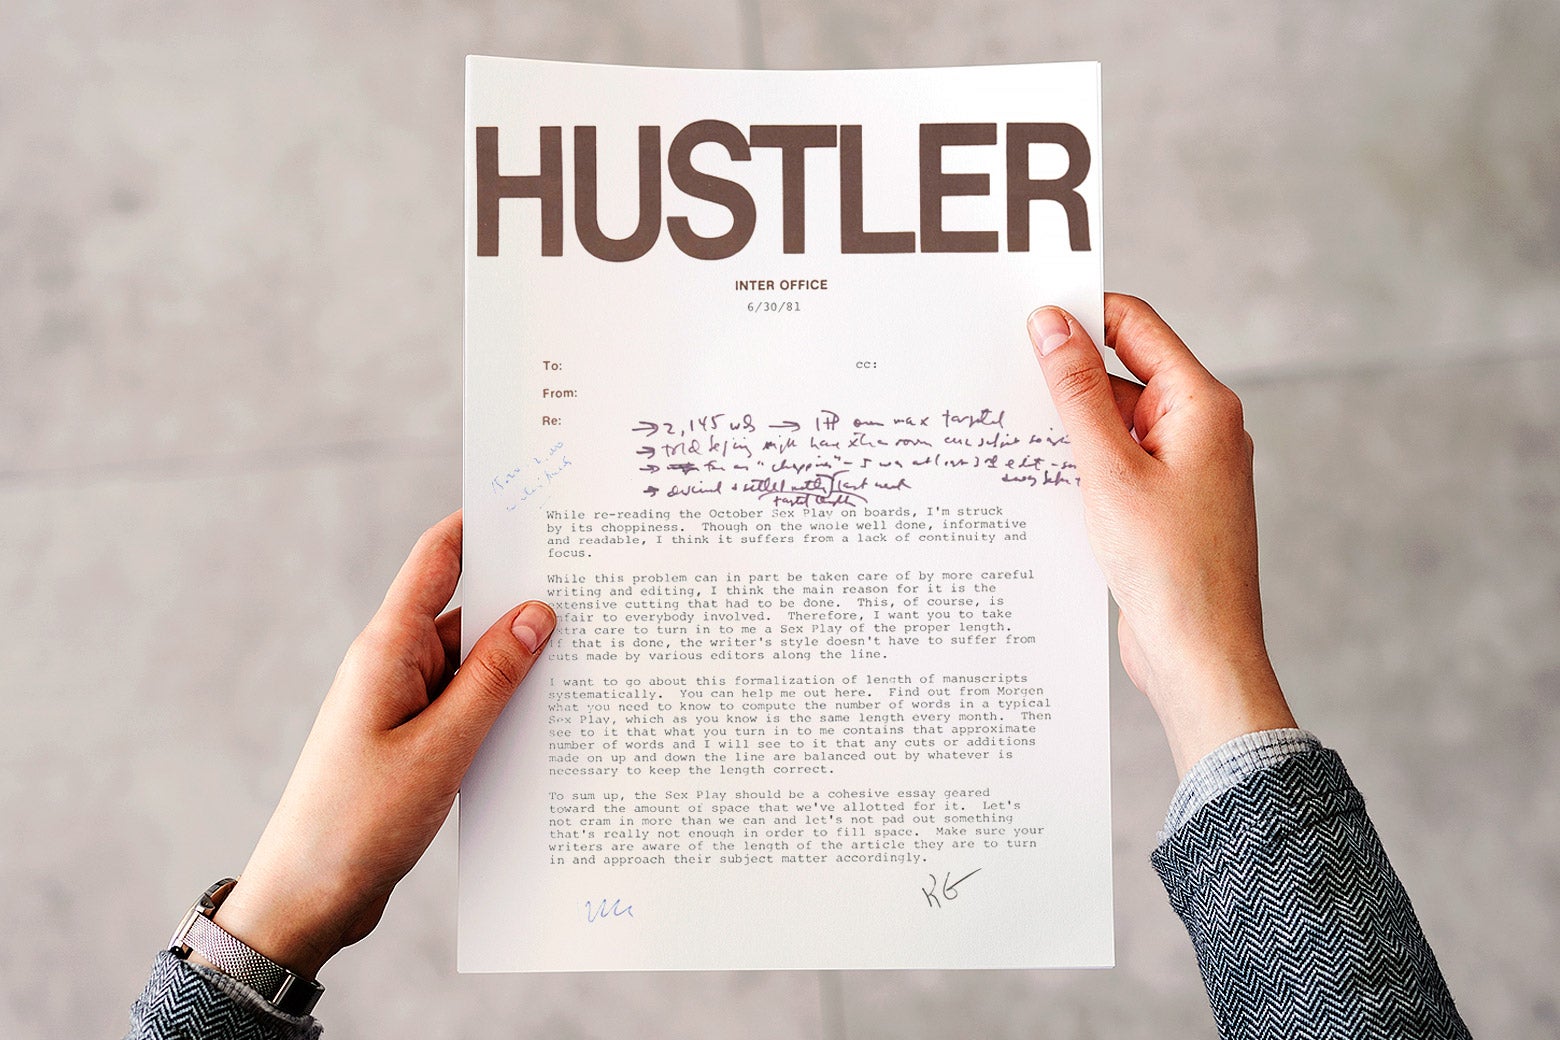 Exxxtra Young Com - Larry Flynt's Hustler Magazine was a madhouse in the 1980s. I have the  inter-office memos prove it.